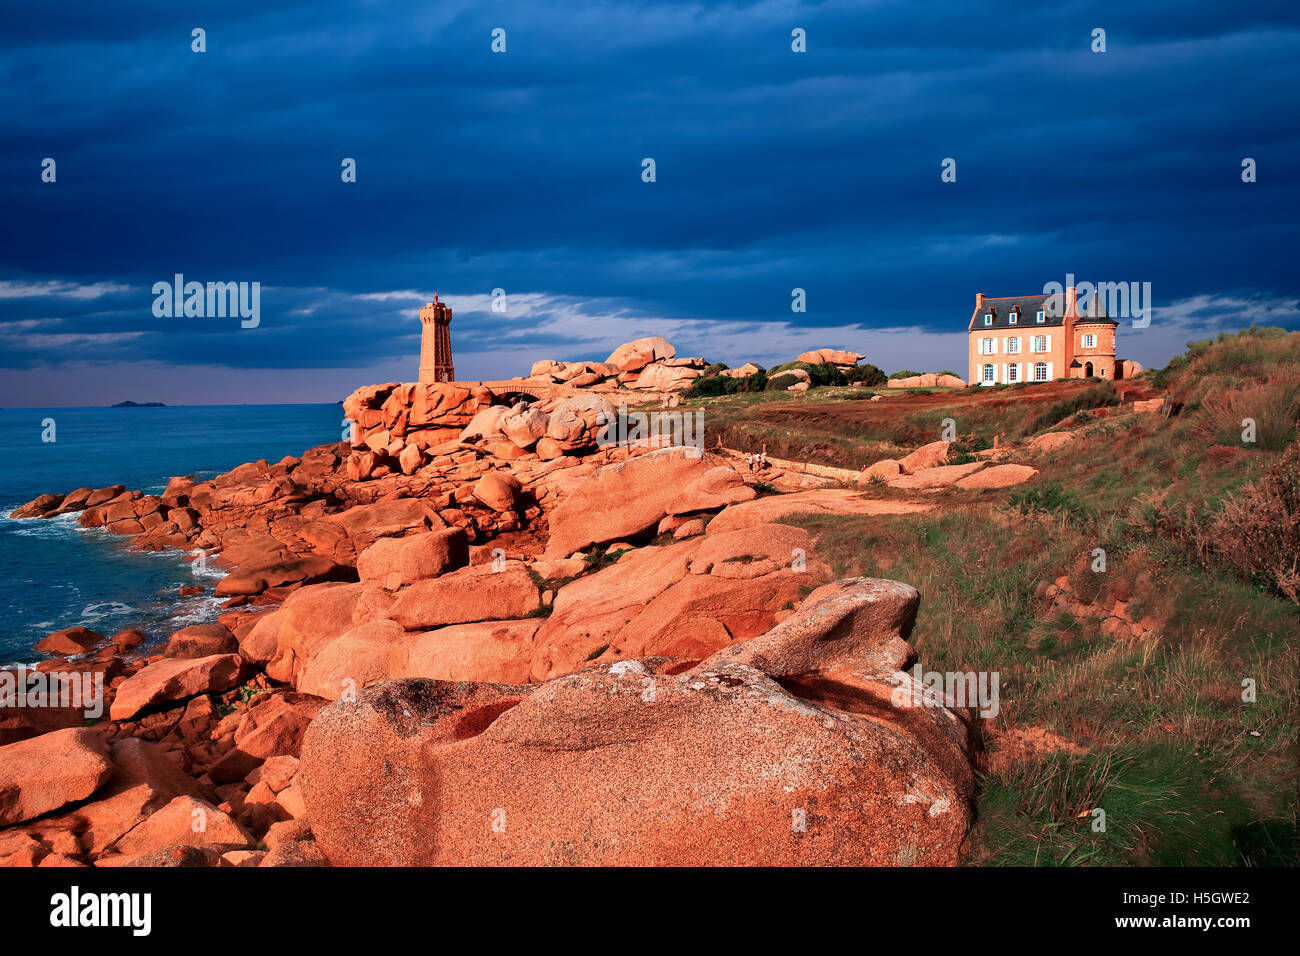 Ploumanac'h lighthouse in Brittany, France Stock Photo